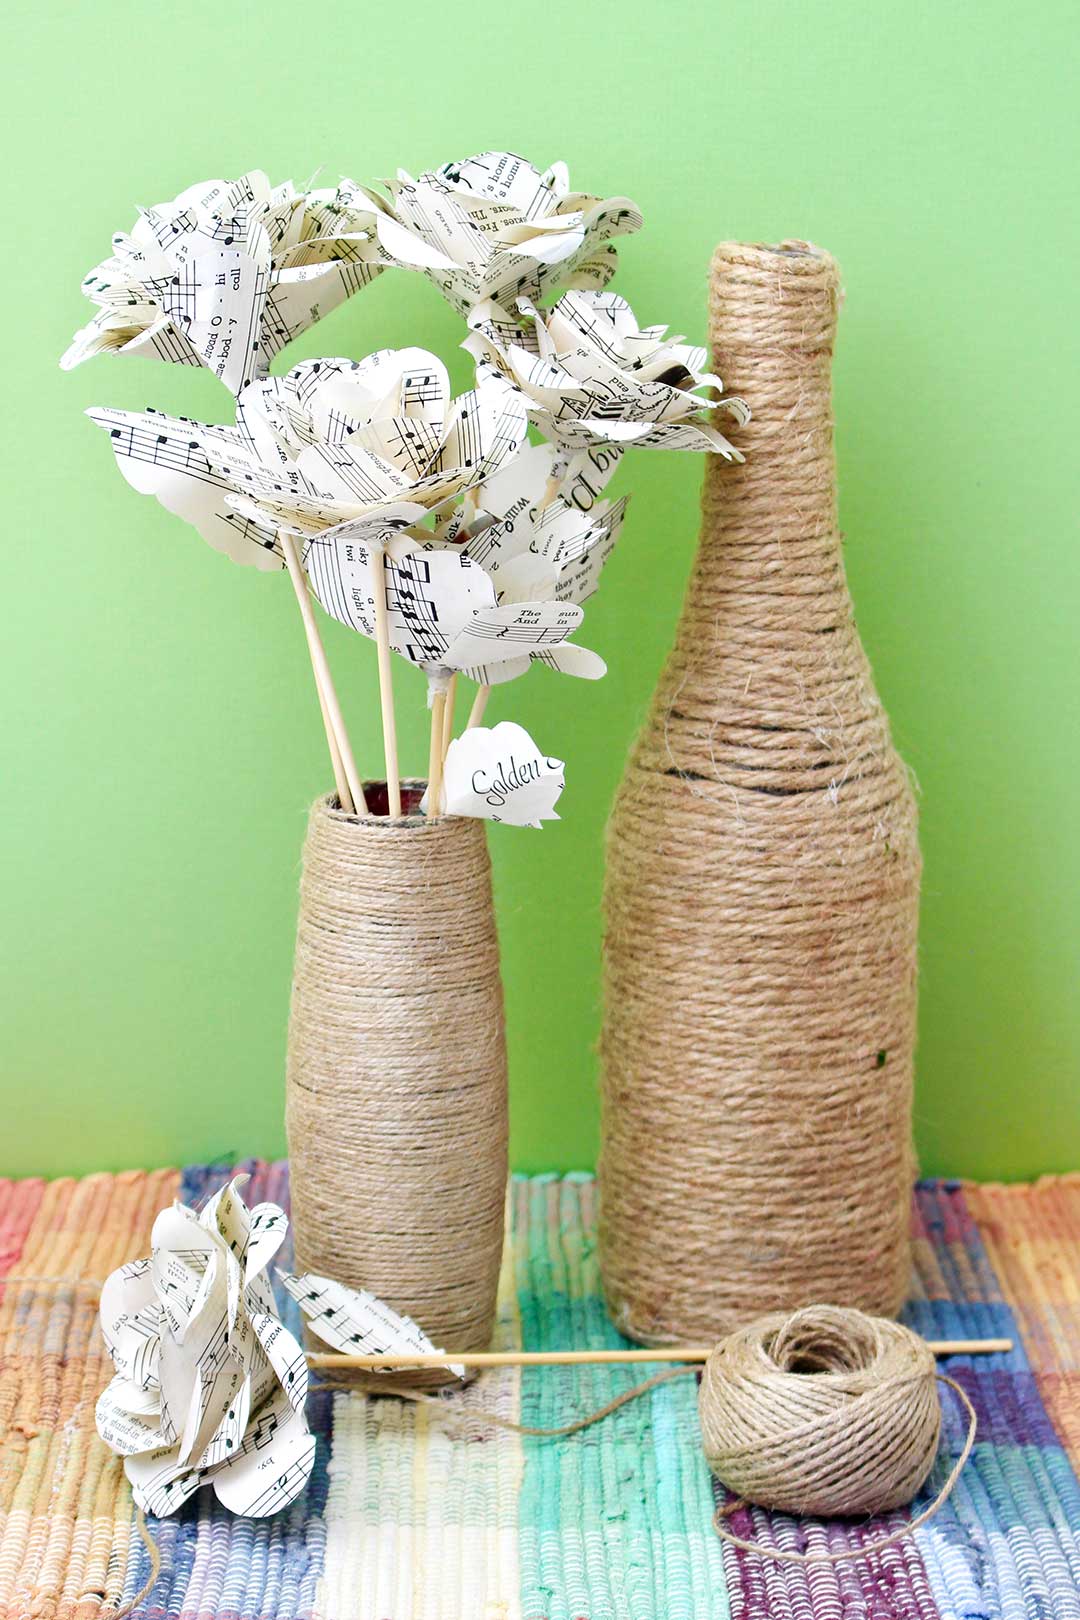 A twine wrapped bottle and a twine wrapped vase with paper flowers inside sitting on a colorful placemat against a green backdrop.